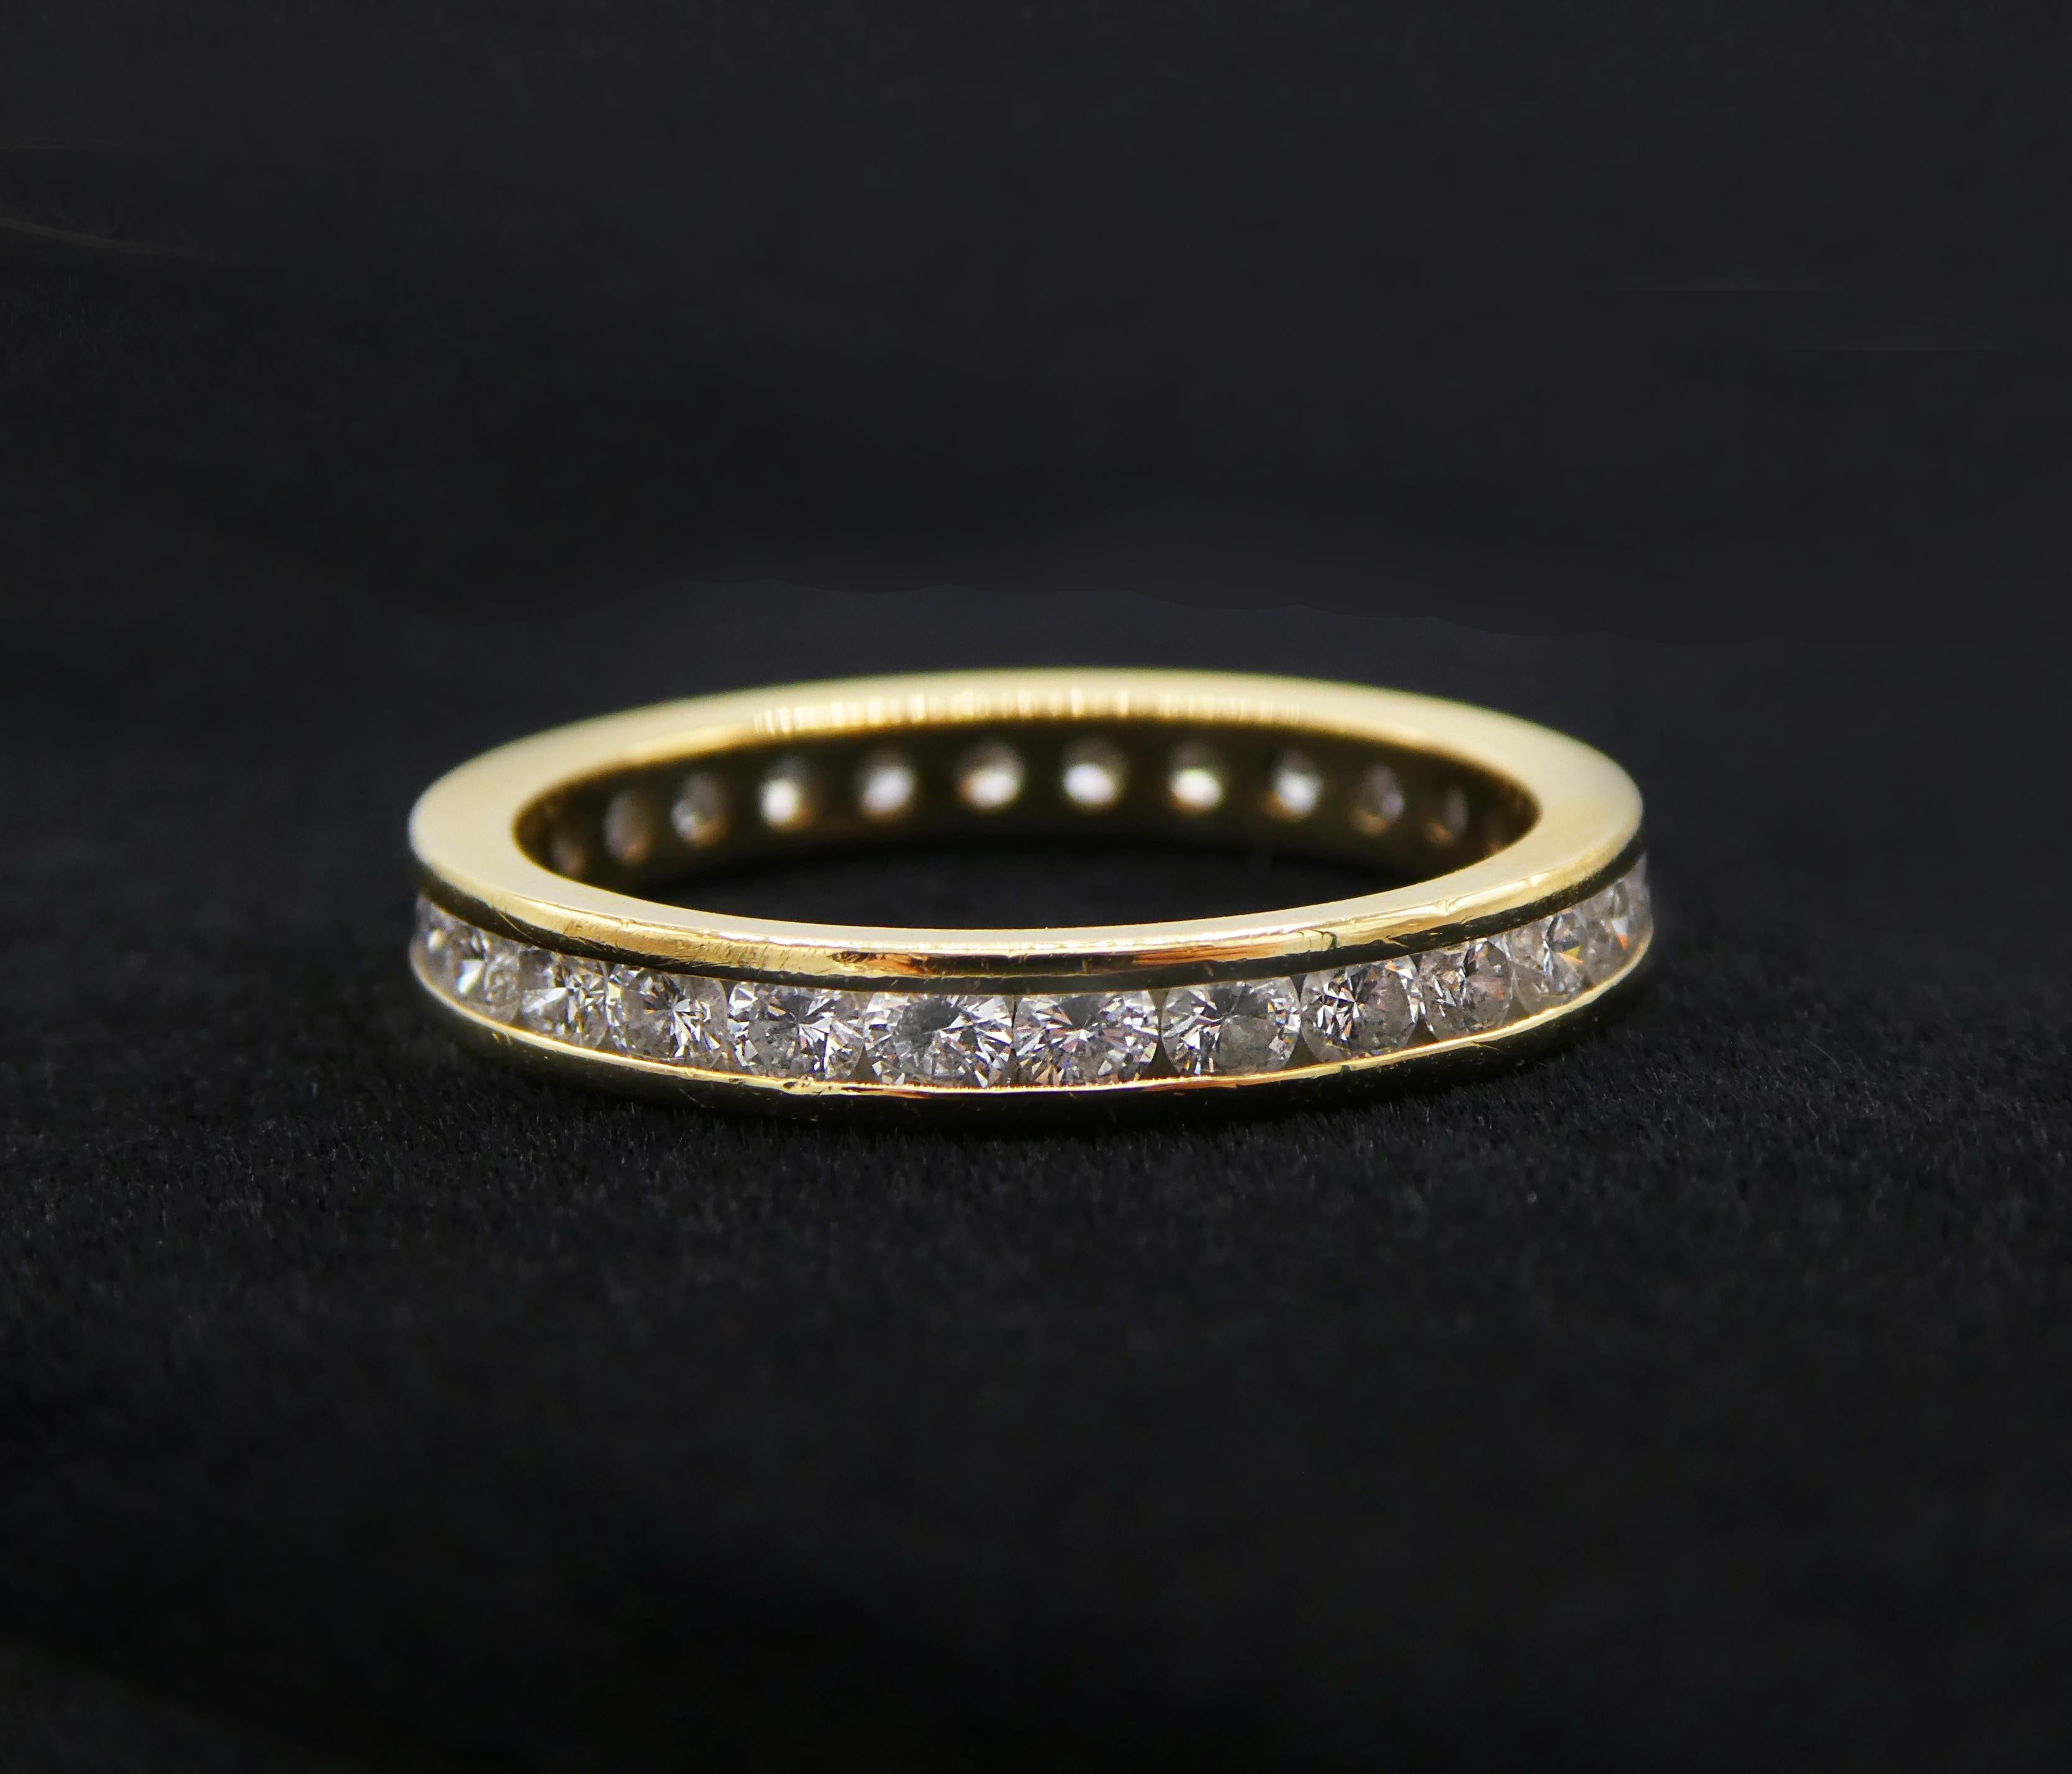 Diamond 0.50 CTW Wedding Band 18k Yellow Gold Channel Set Round Brilliant Cut Ring Size 5

Metal: 18k Yellow Gold
Diamonds: 29 round brilliant cut diamonds approx. 0.50 ctw G-H VS. 
Weight: 2.18 grams
Size: 5
Markings: no marking but has been